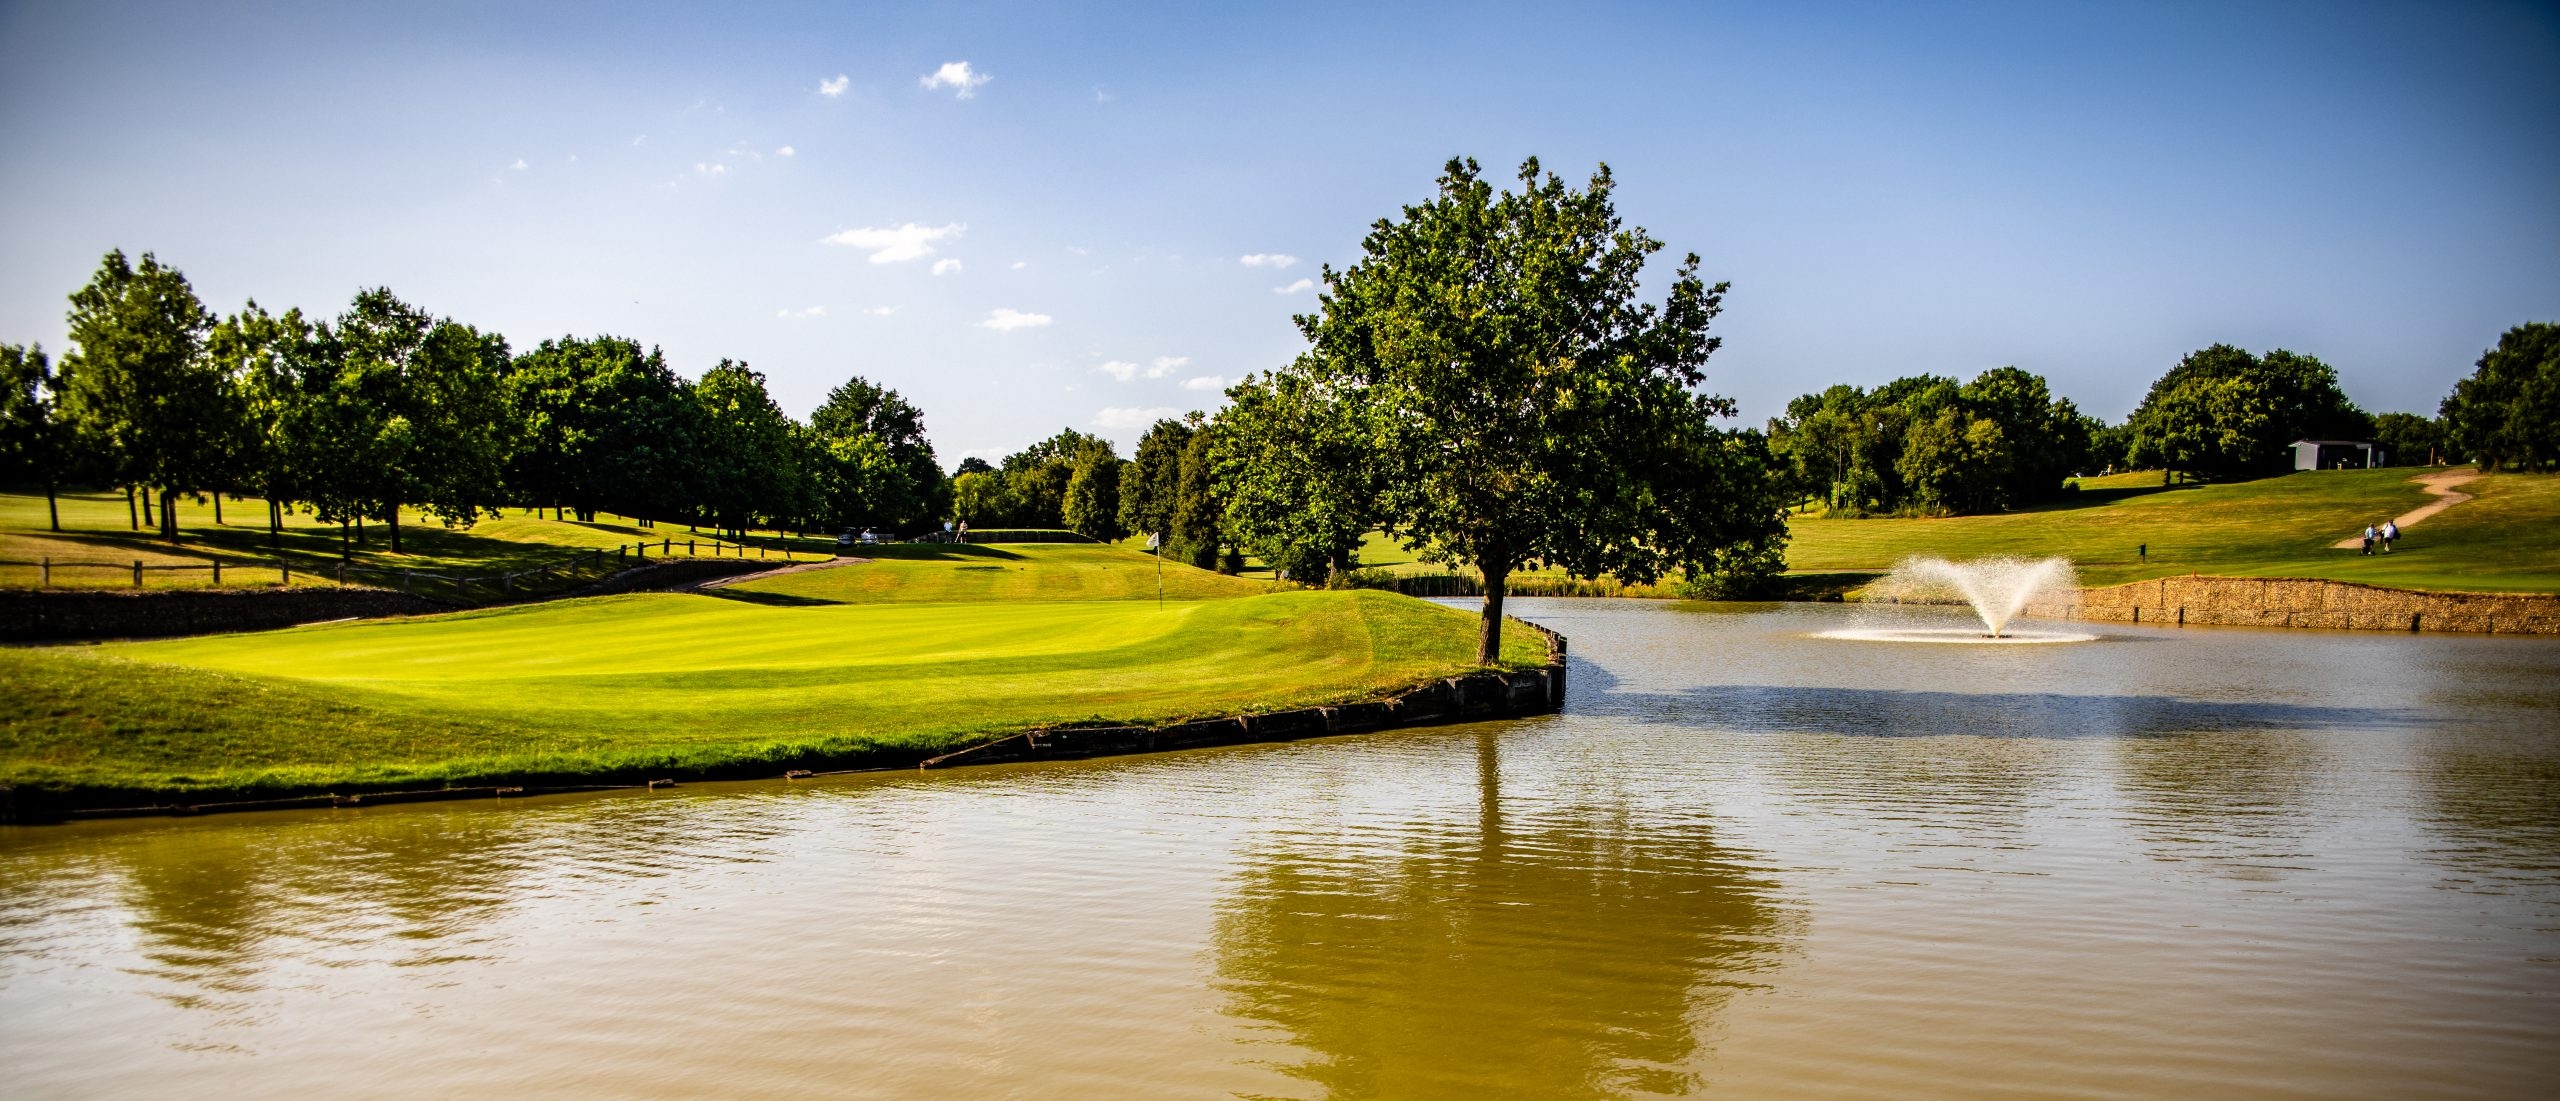 View of Toot Hill golf course across water feature